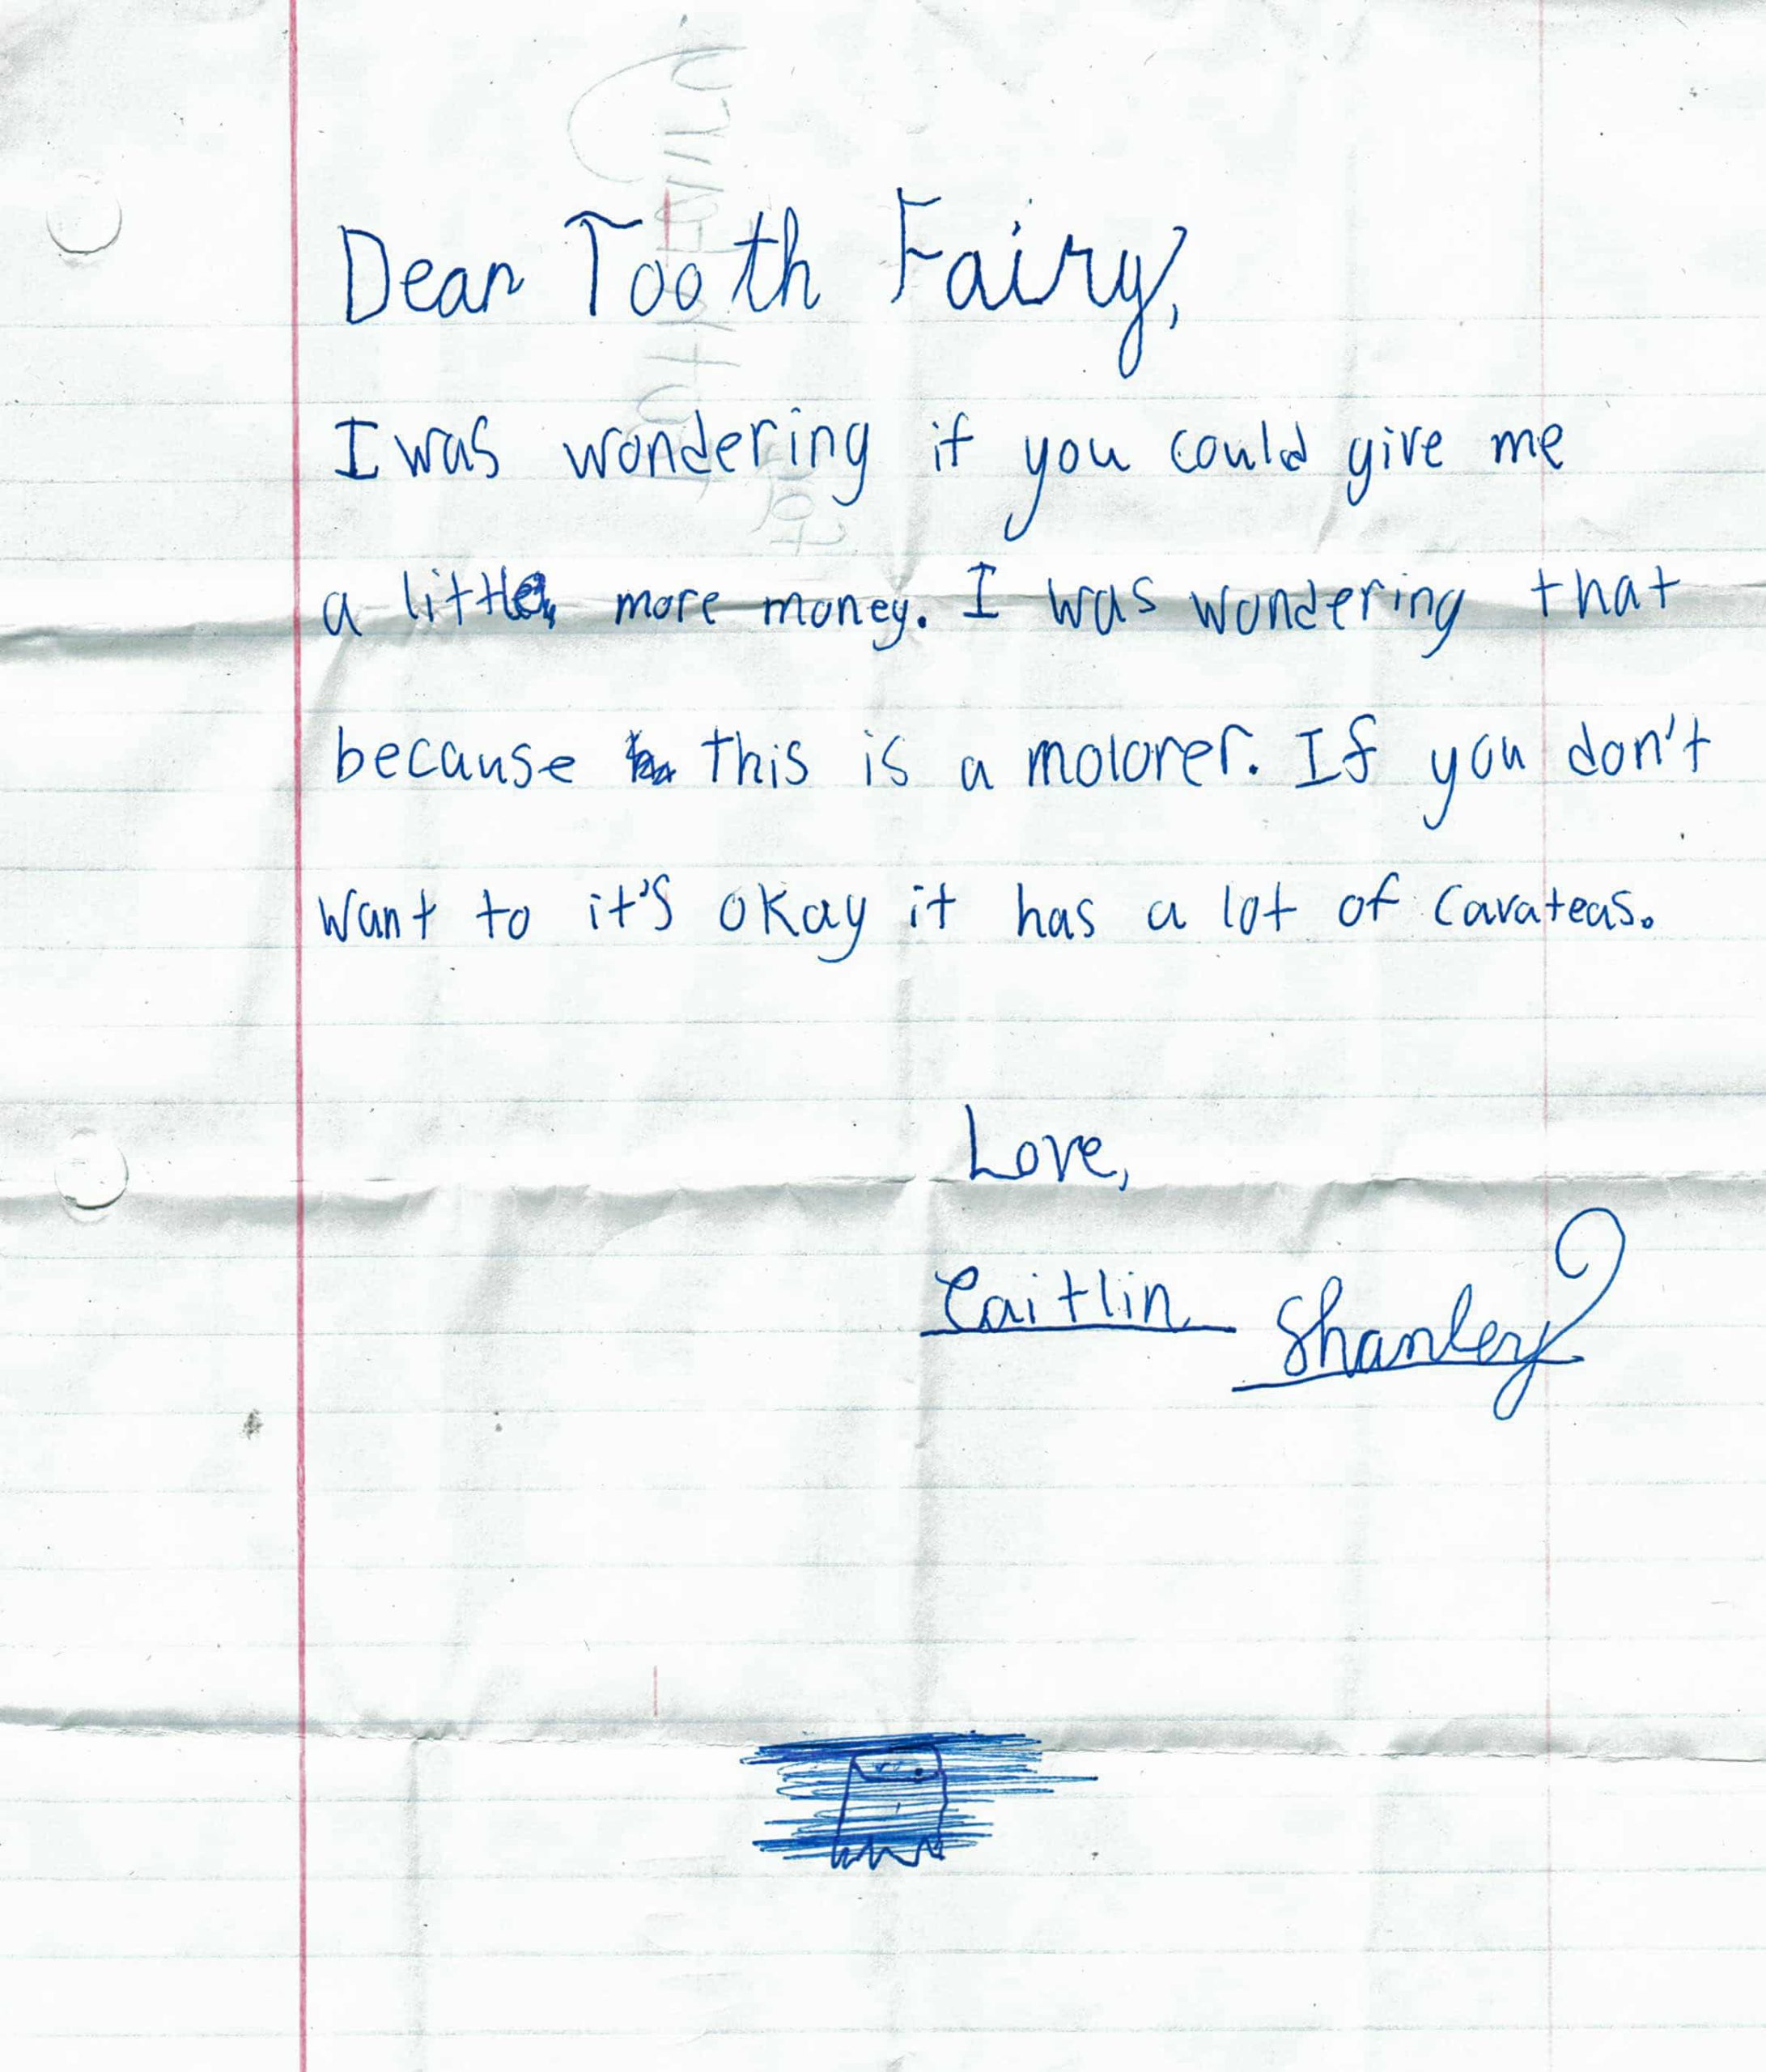 Letter to Tooth Fairy